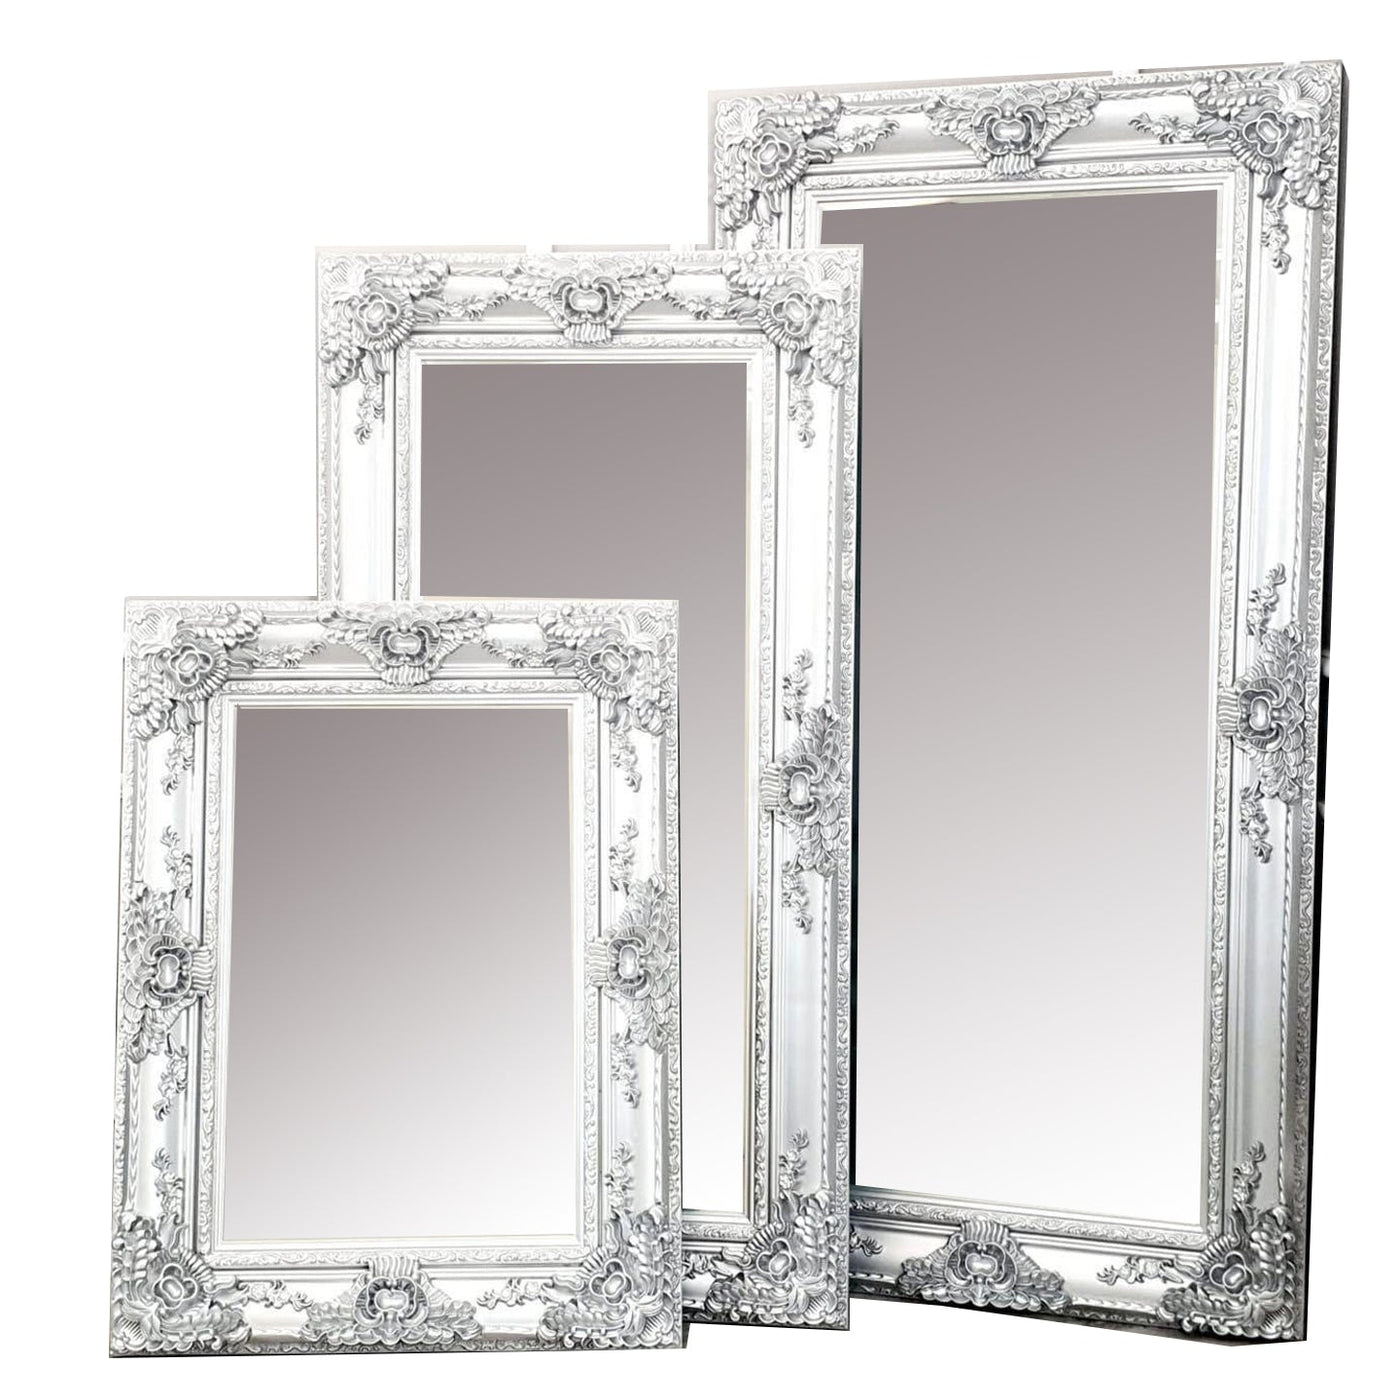 Roma Bevel Mirror in Silver - ALL SIZES